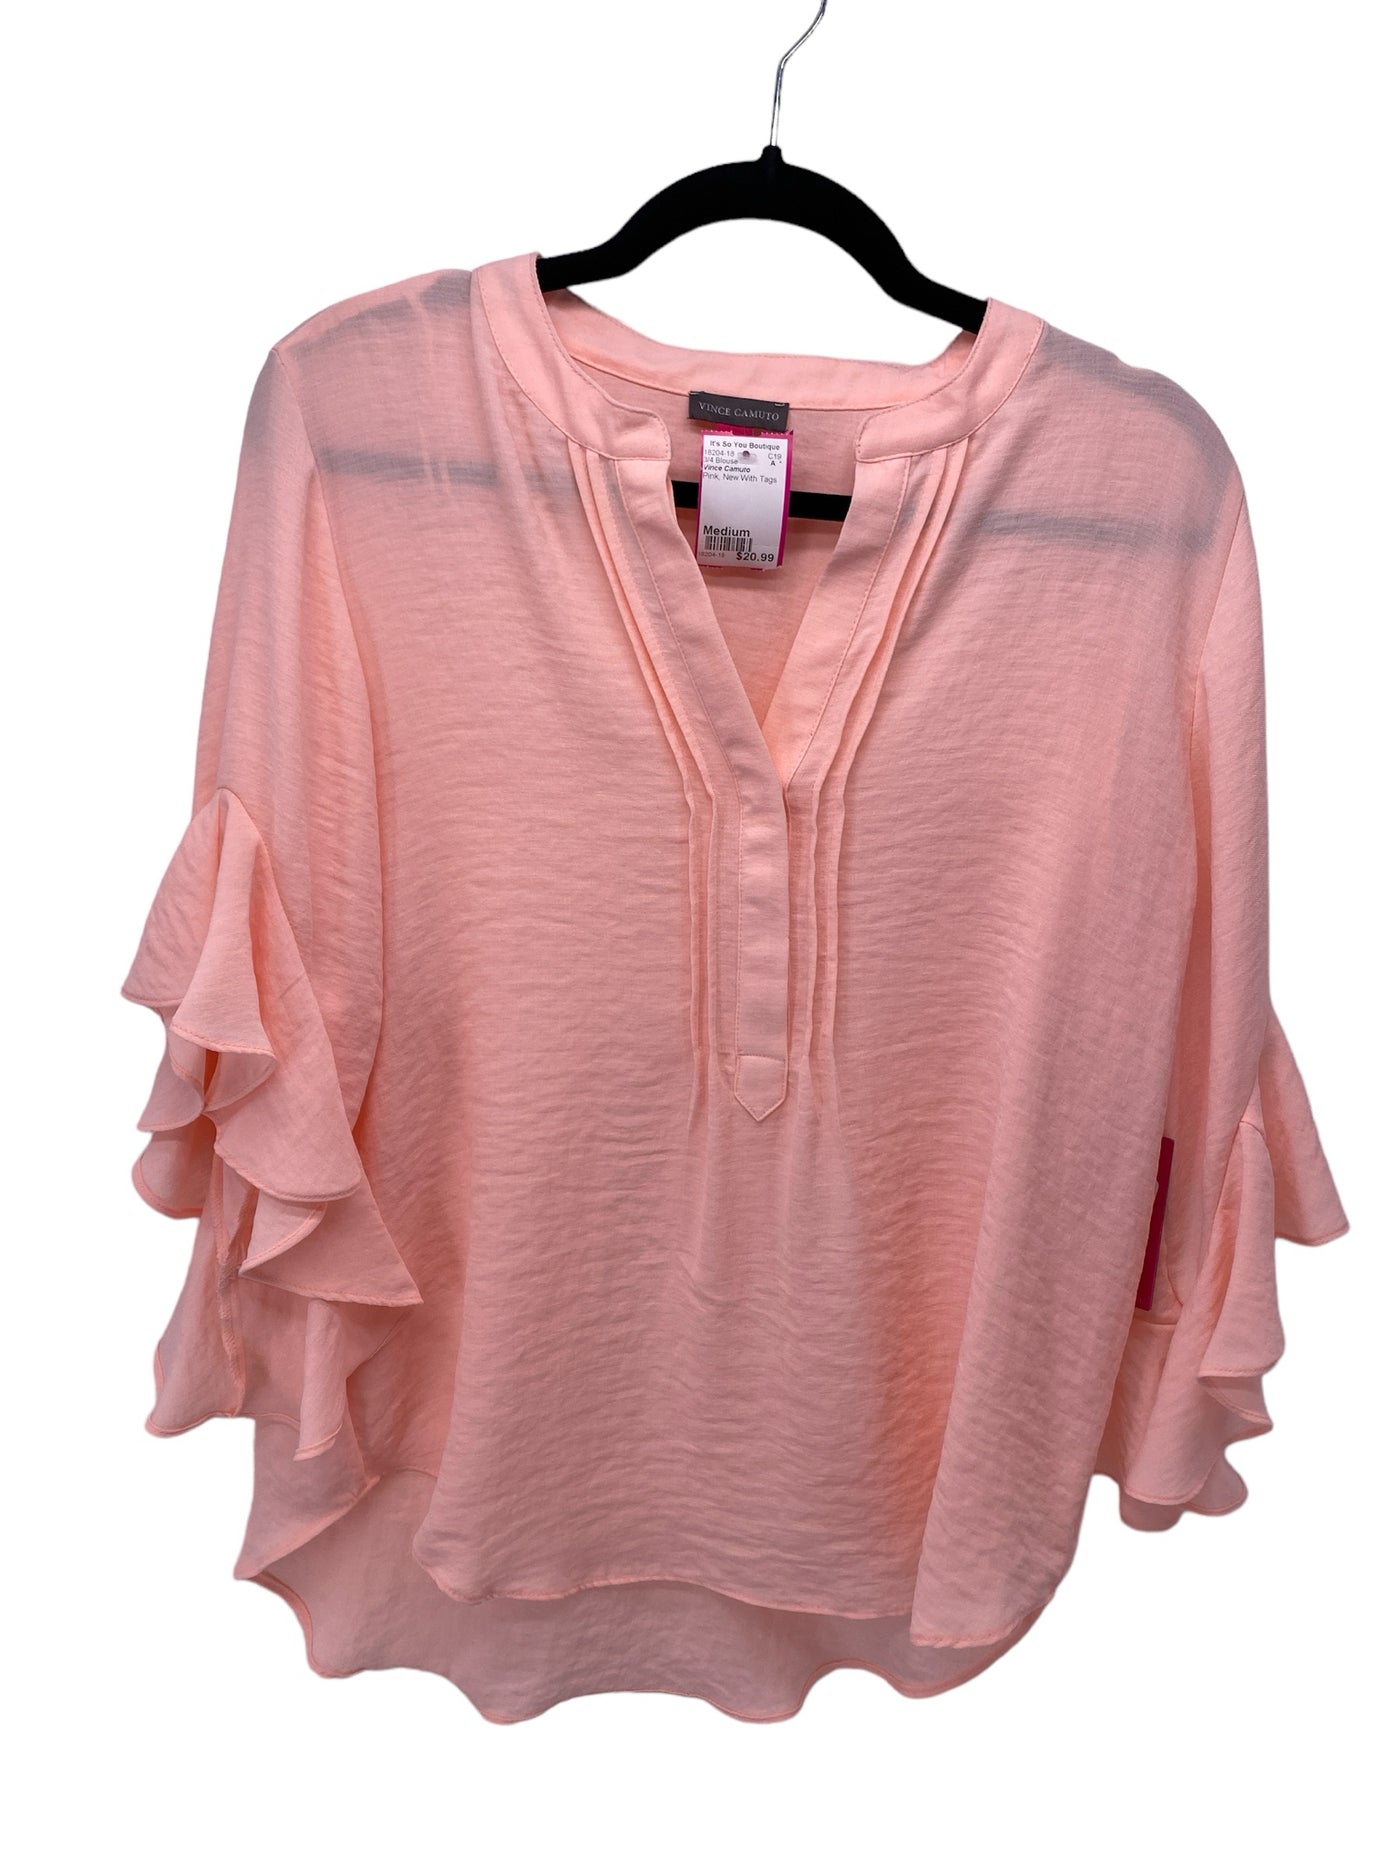 Vince Camuto Misses Size Medium Pink New With Tags 3/4 Blouse